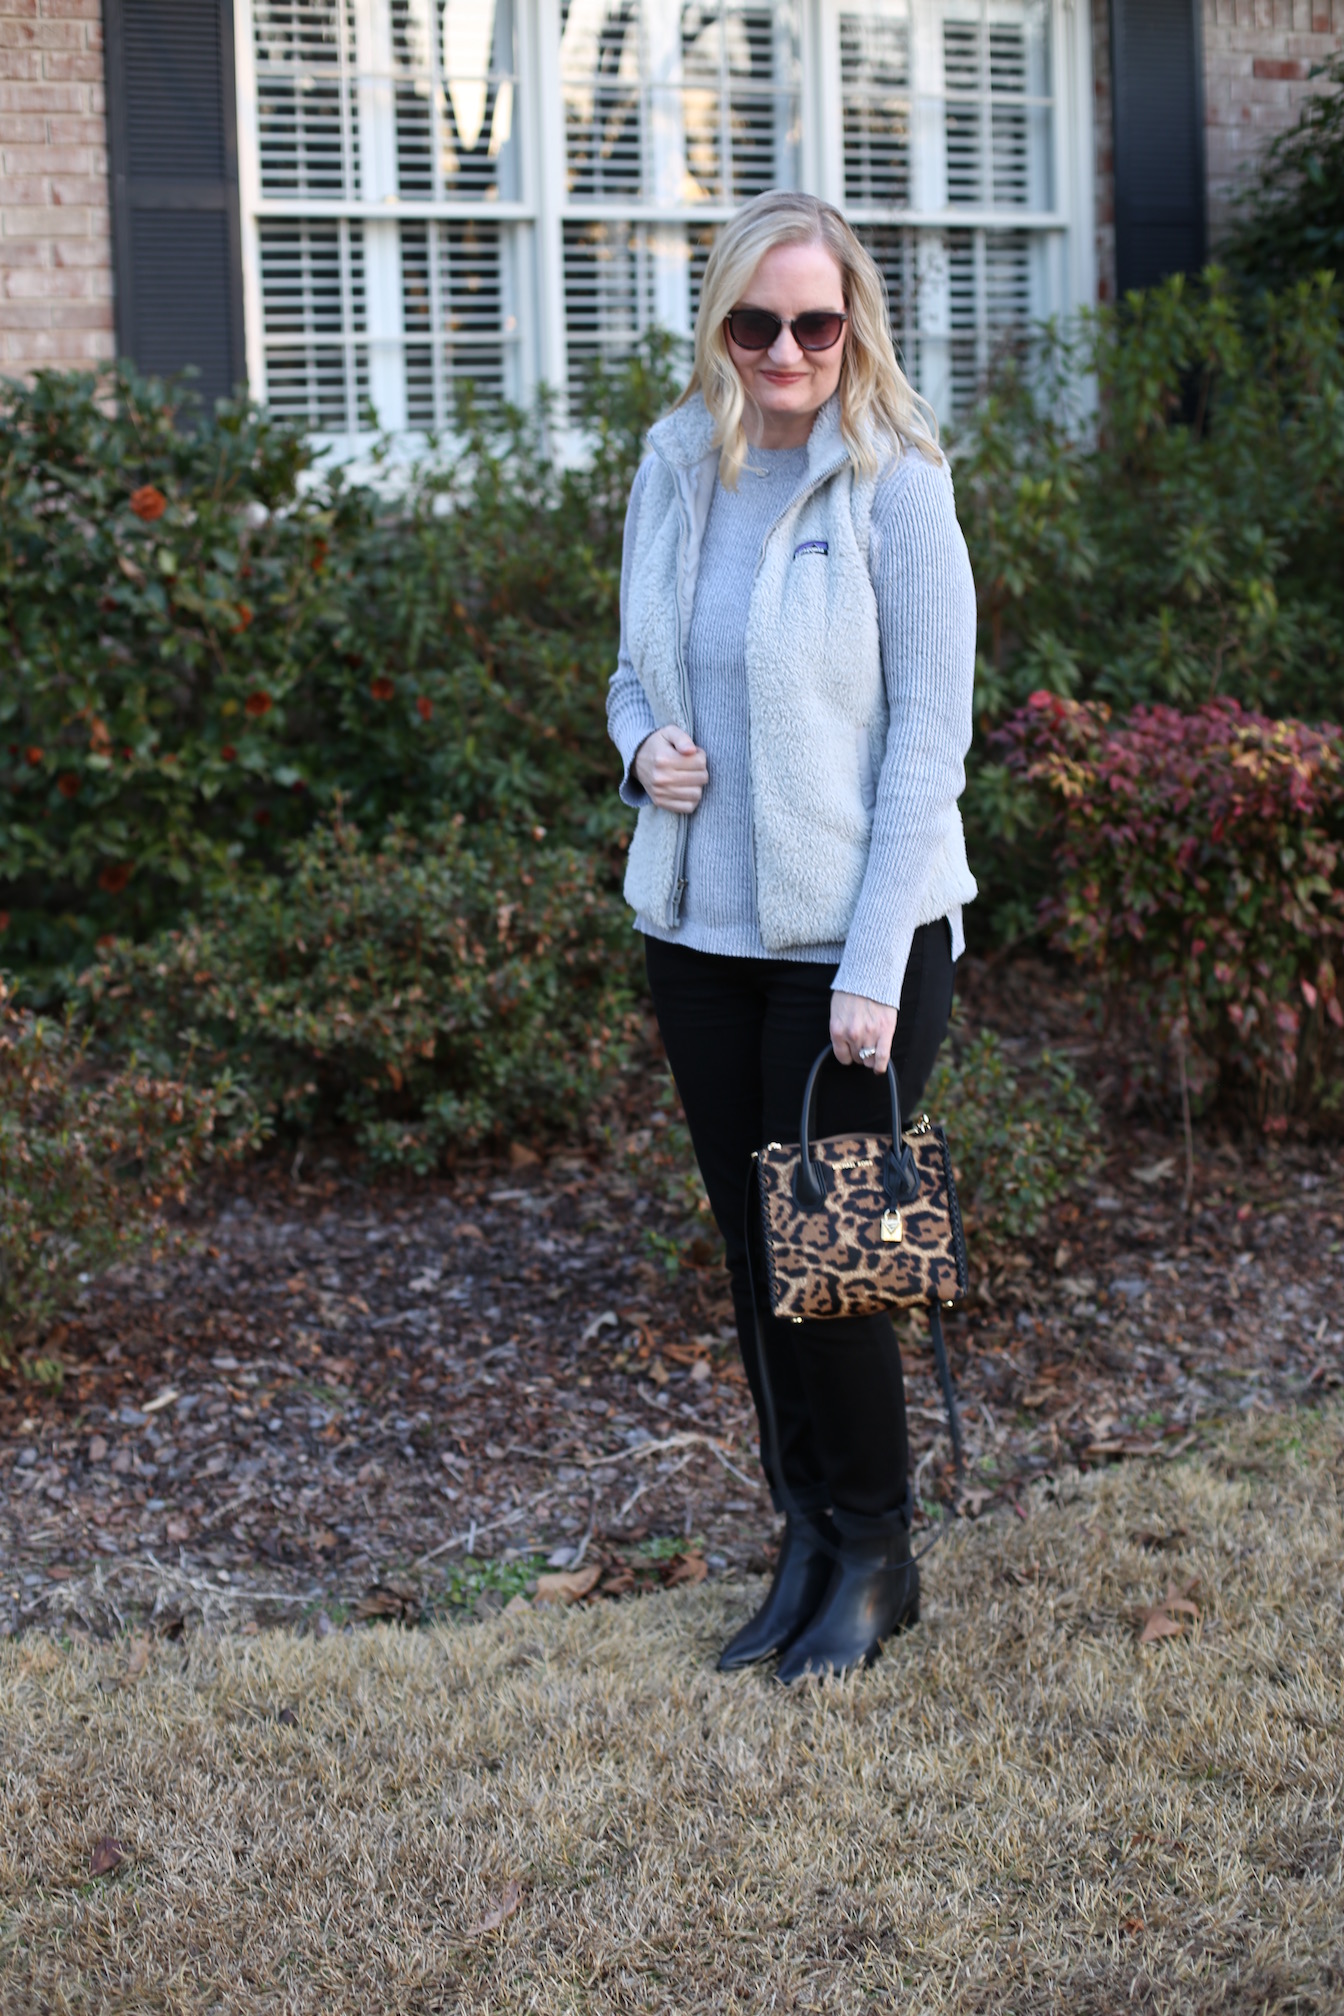 Black Gray and Leopard Outfit